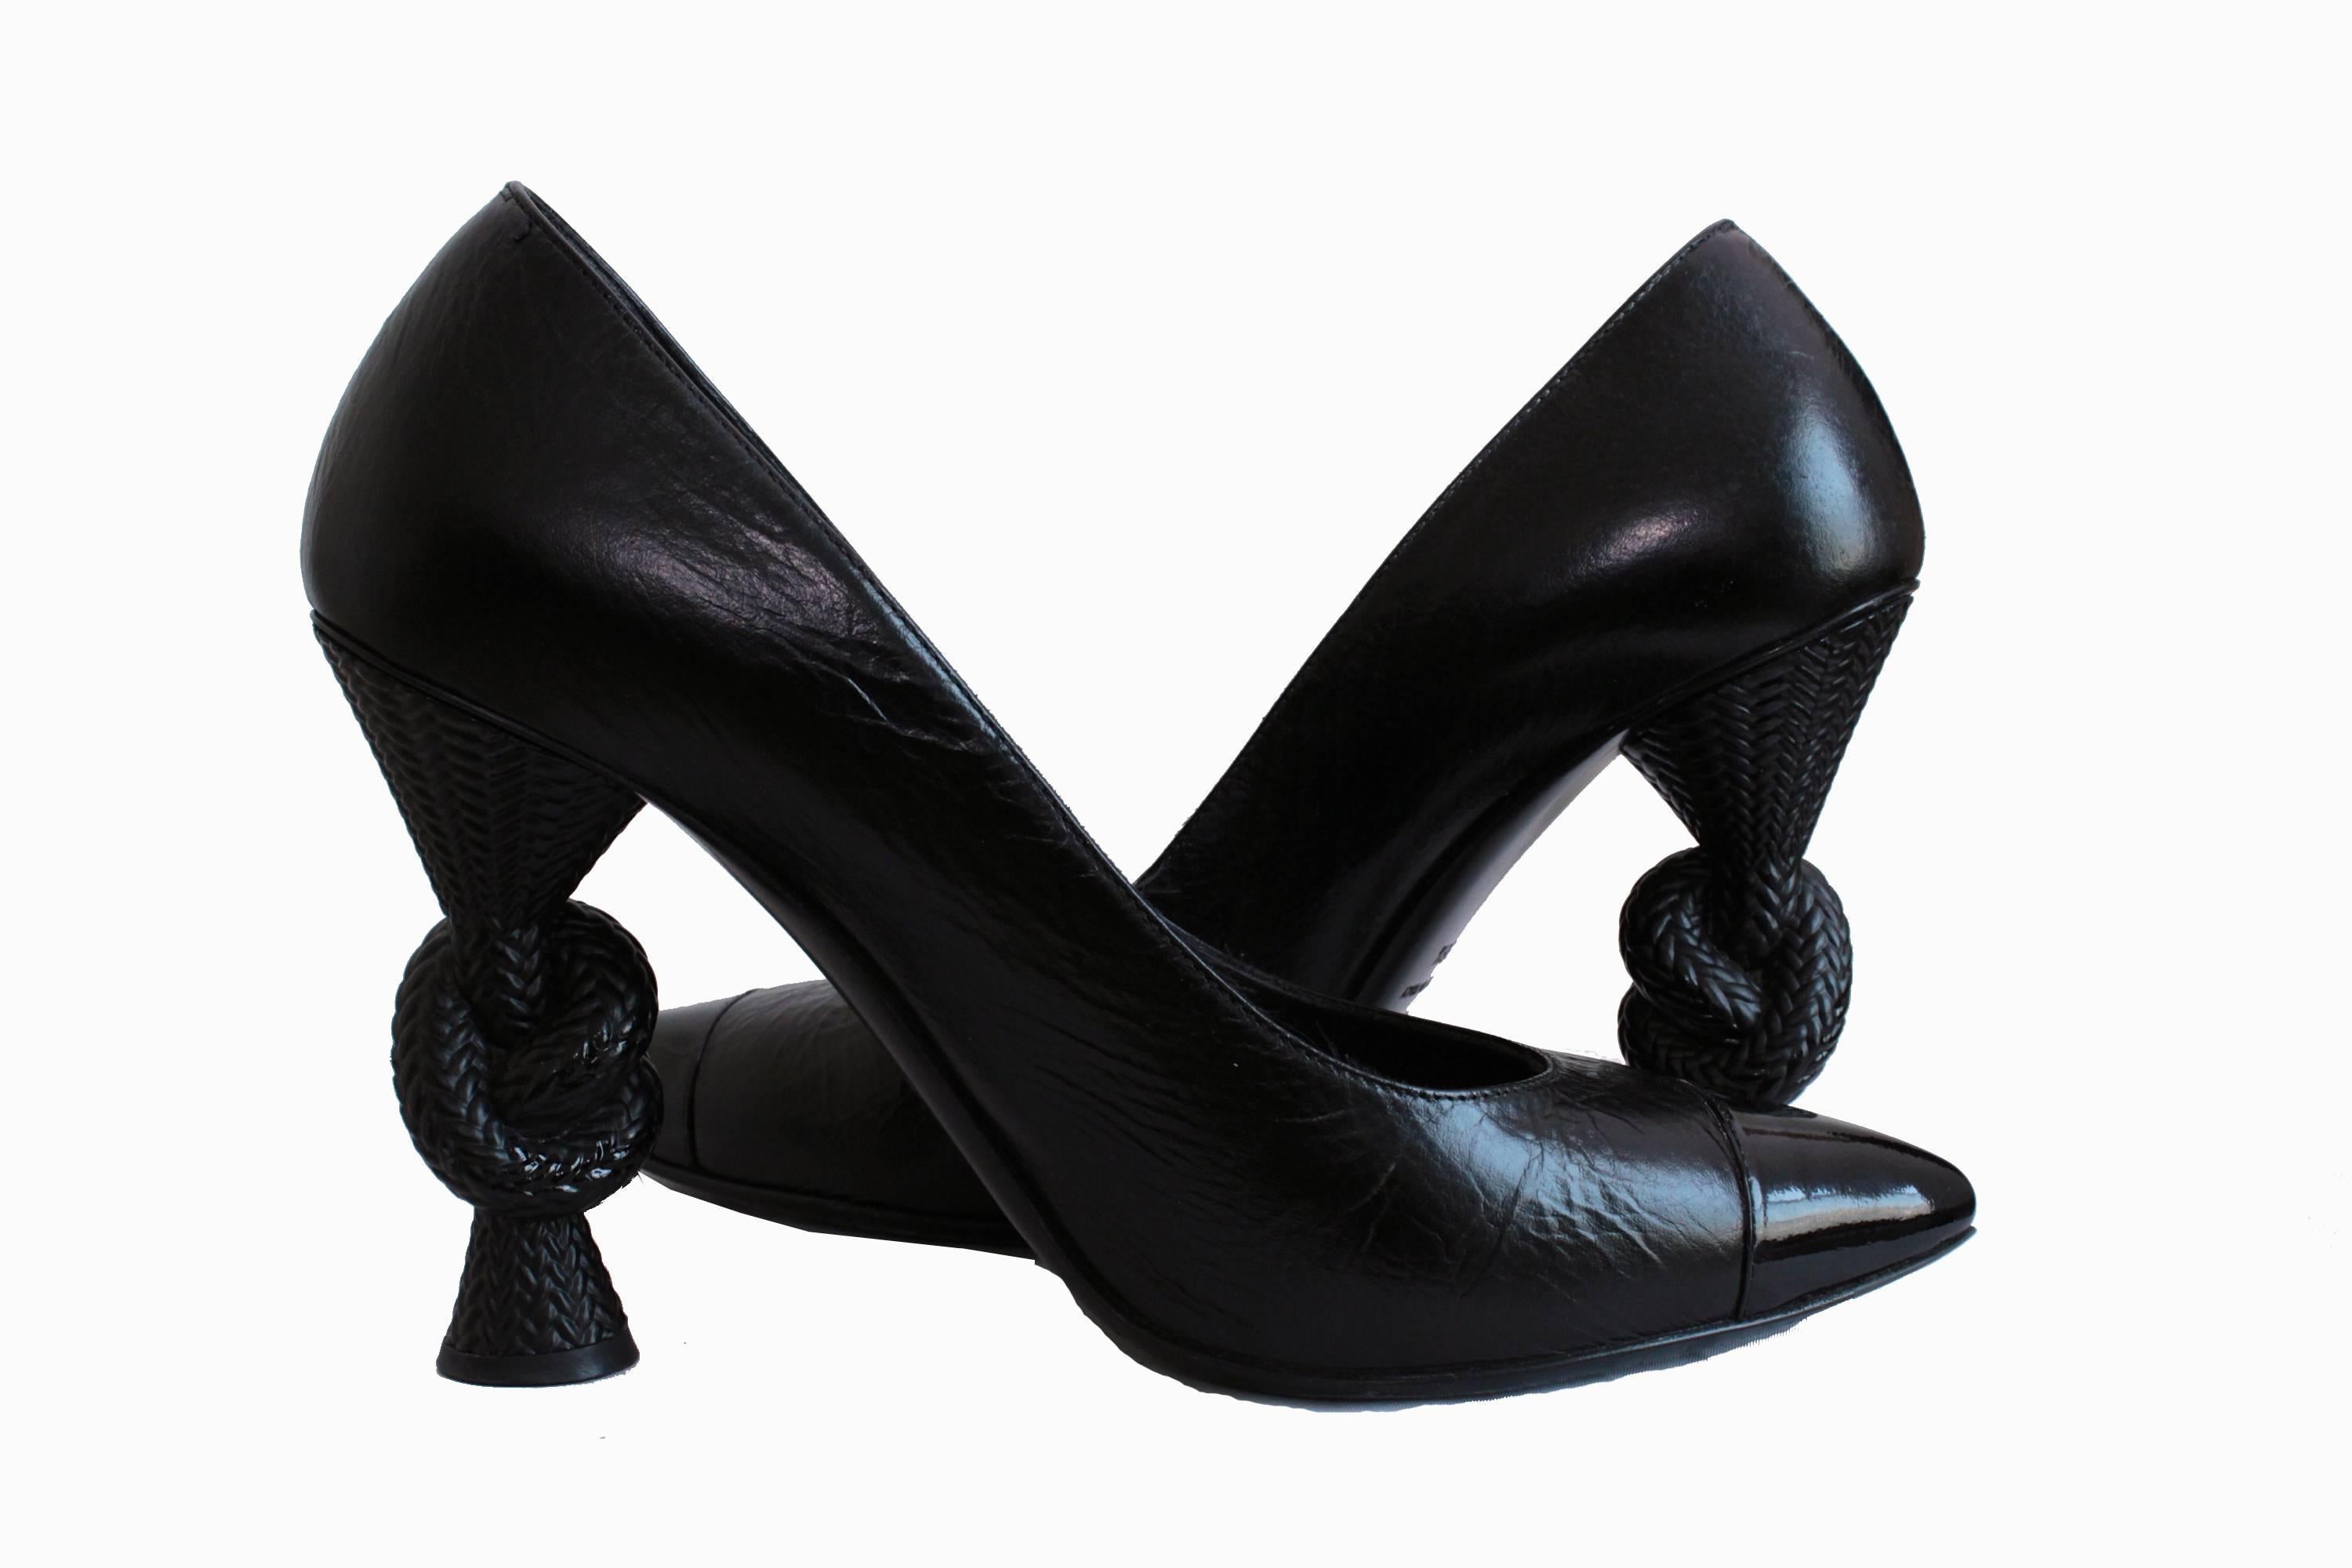 Rare Chanel Knot Heel Shoes Black Leather and Patent 2014 Resort Sz 38.5 1